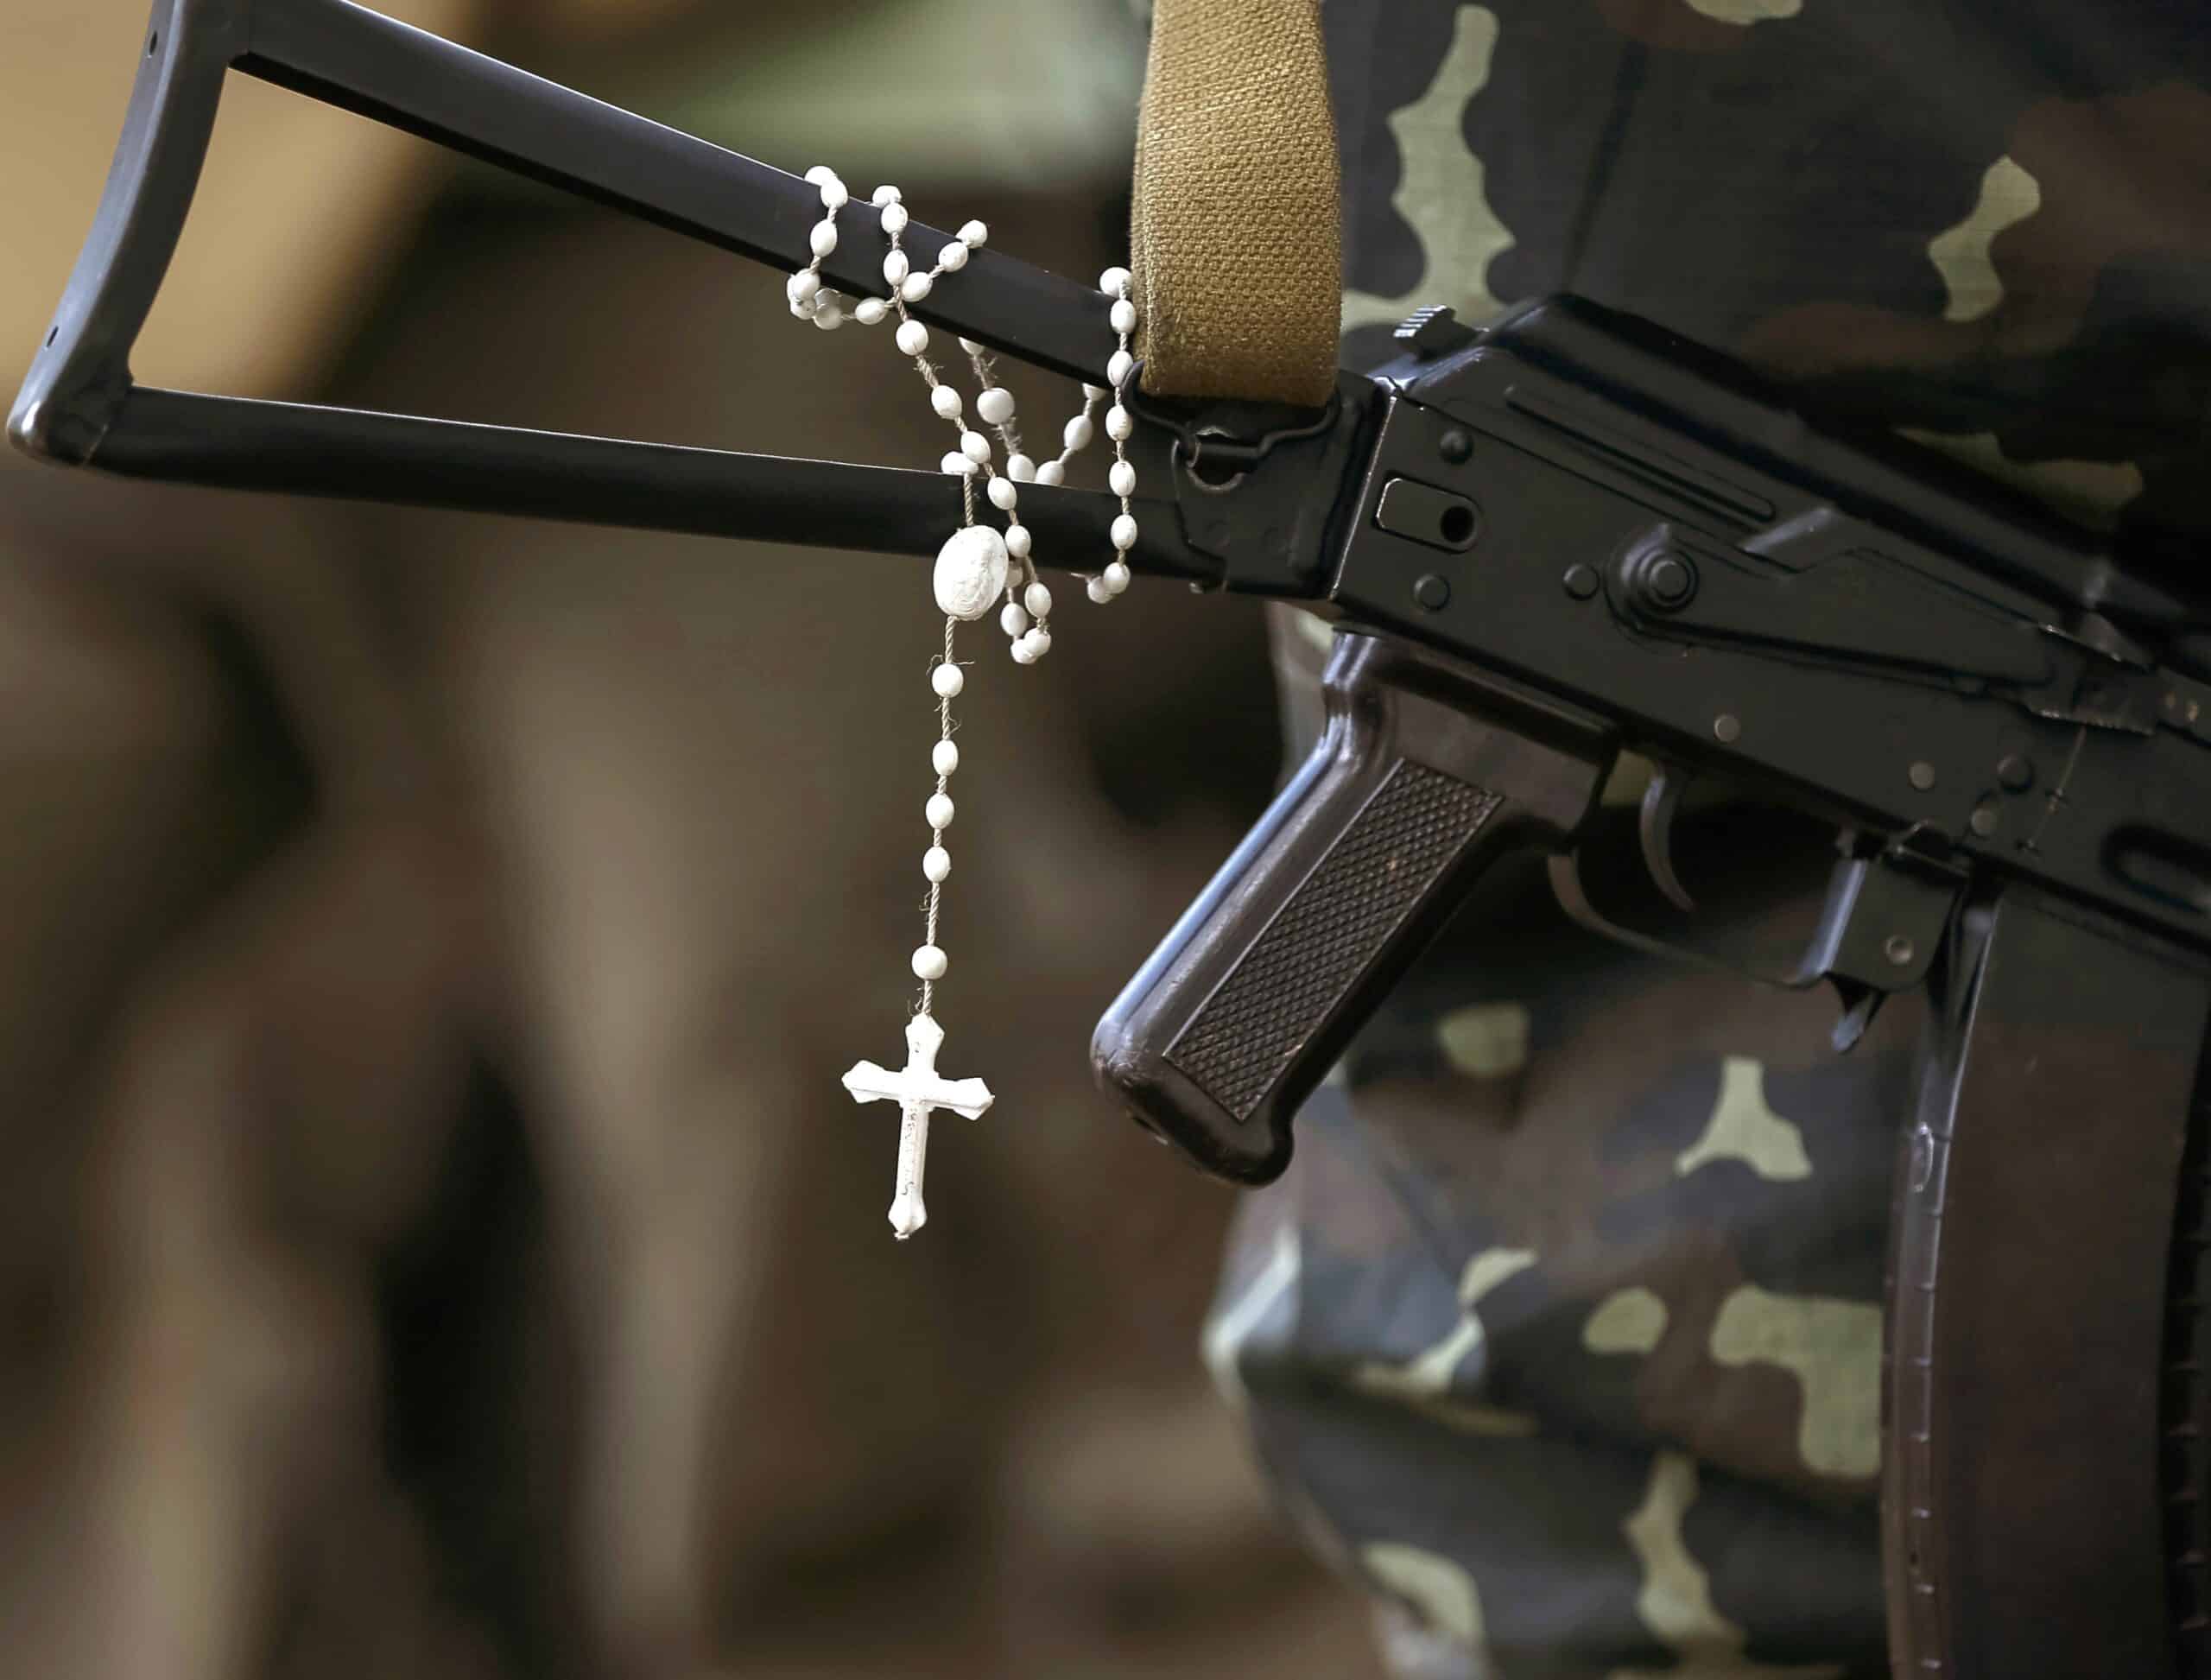 A rosary is pictured hanging from a machine gun in an undated file photo as Ukrainian soldiers stand at their positions near the Ukrainian town of Pervomaysk. Dorian Kernytsky, a Philadelphia-area Ukrainian Catholic, has been making hundreds of rugged, stainless steel rosaries for troops in Ukraine, hoping to provide solace amid the horrors of the current war with Russia. (OSV News photo/Gleb Garanich, Reuters)